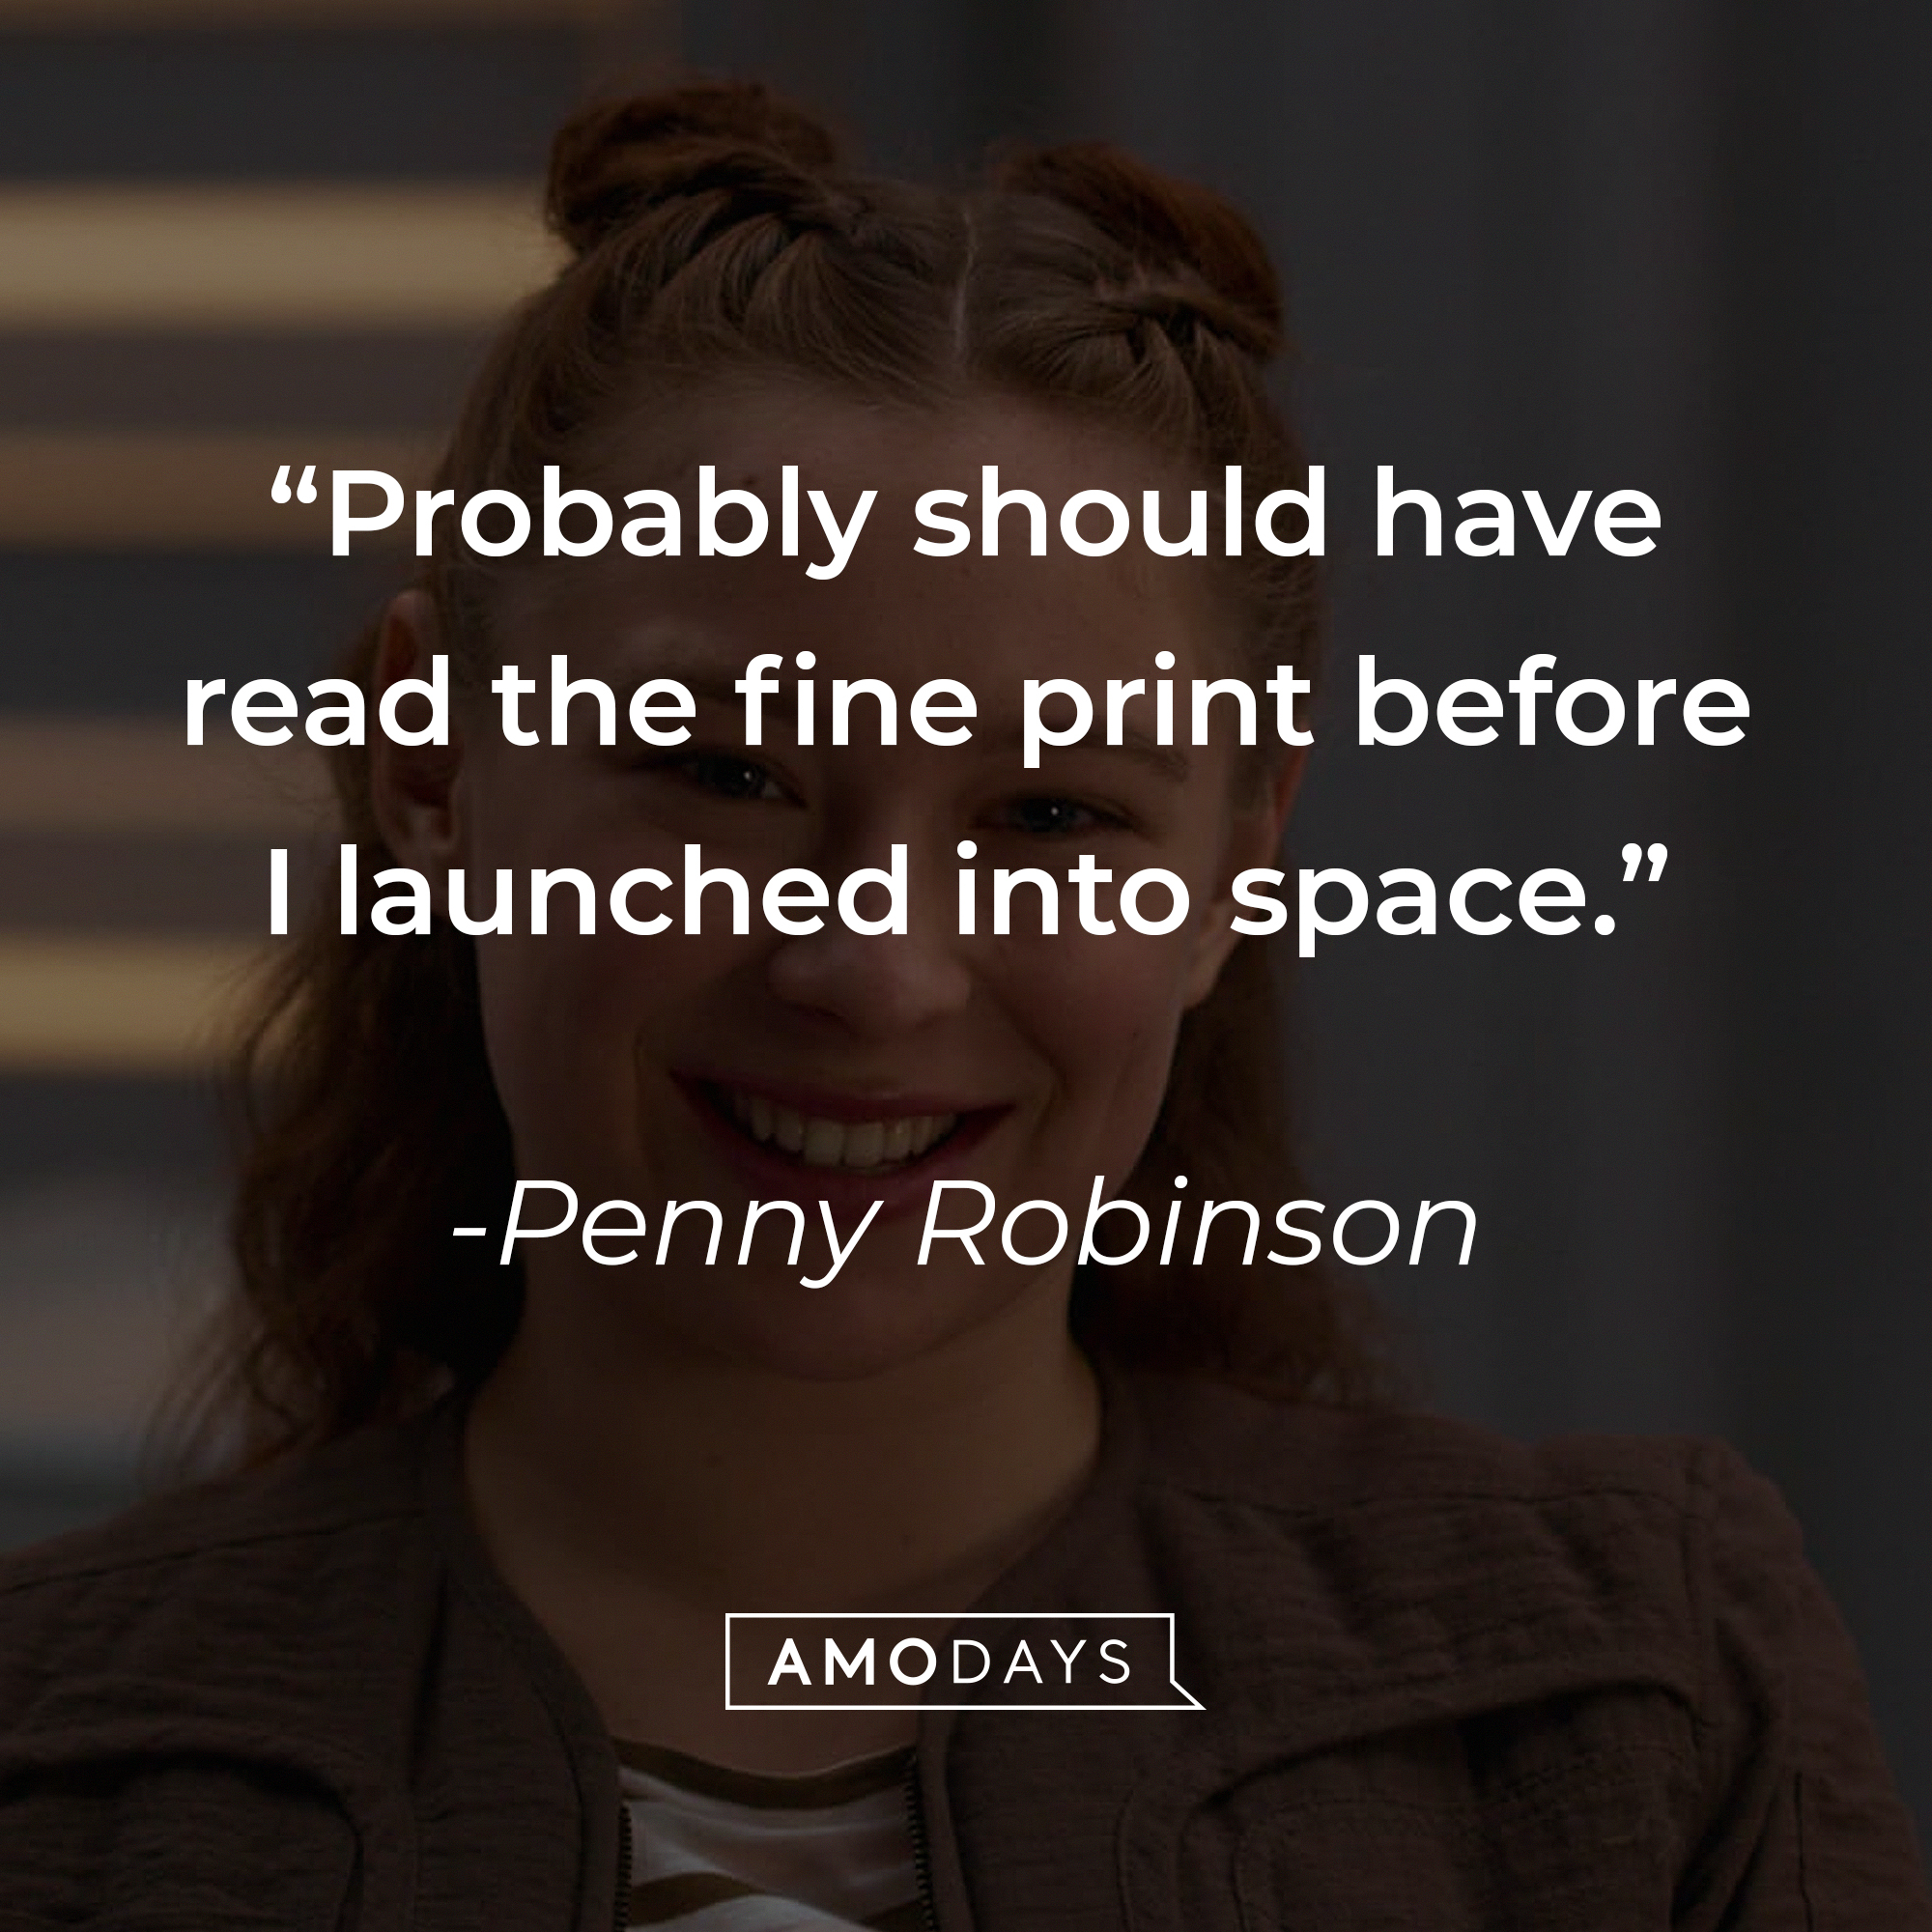 Penny Robinson’s quote: "Probably should have read the fine print before I launched into space." | Image: Facebook.com/lostinspacenetflix